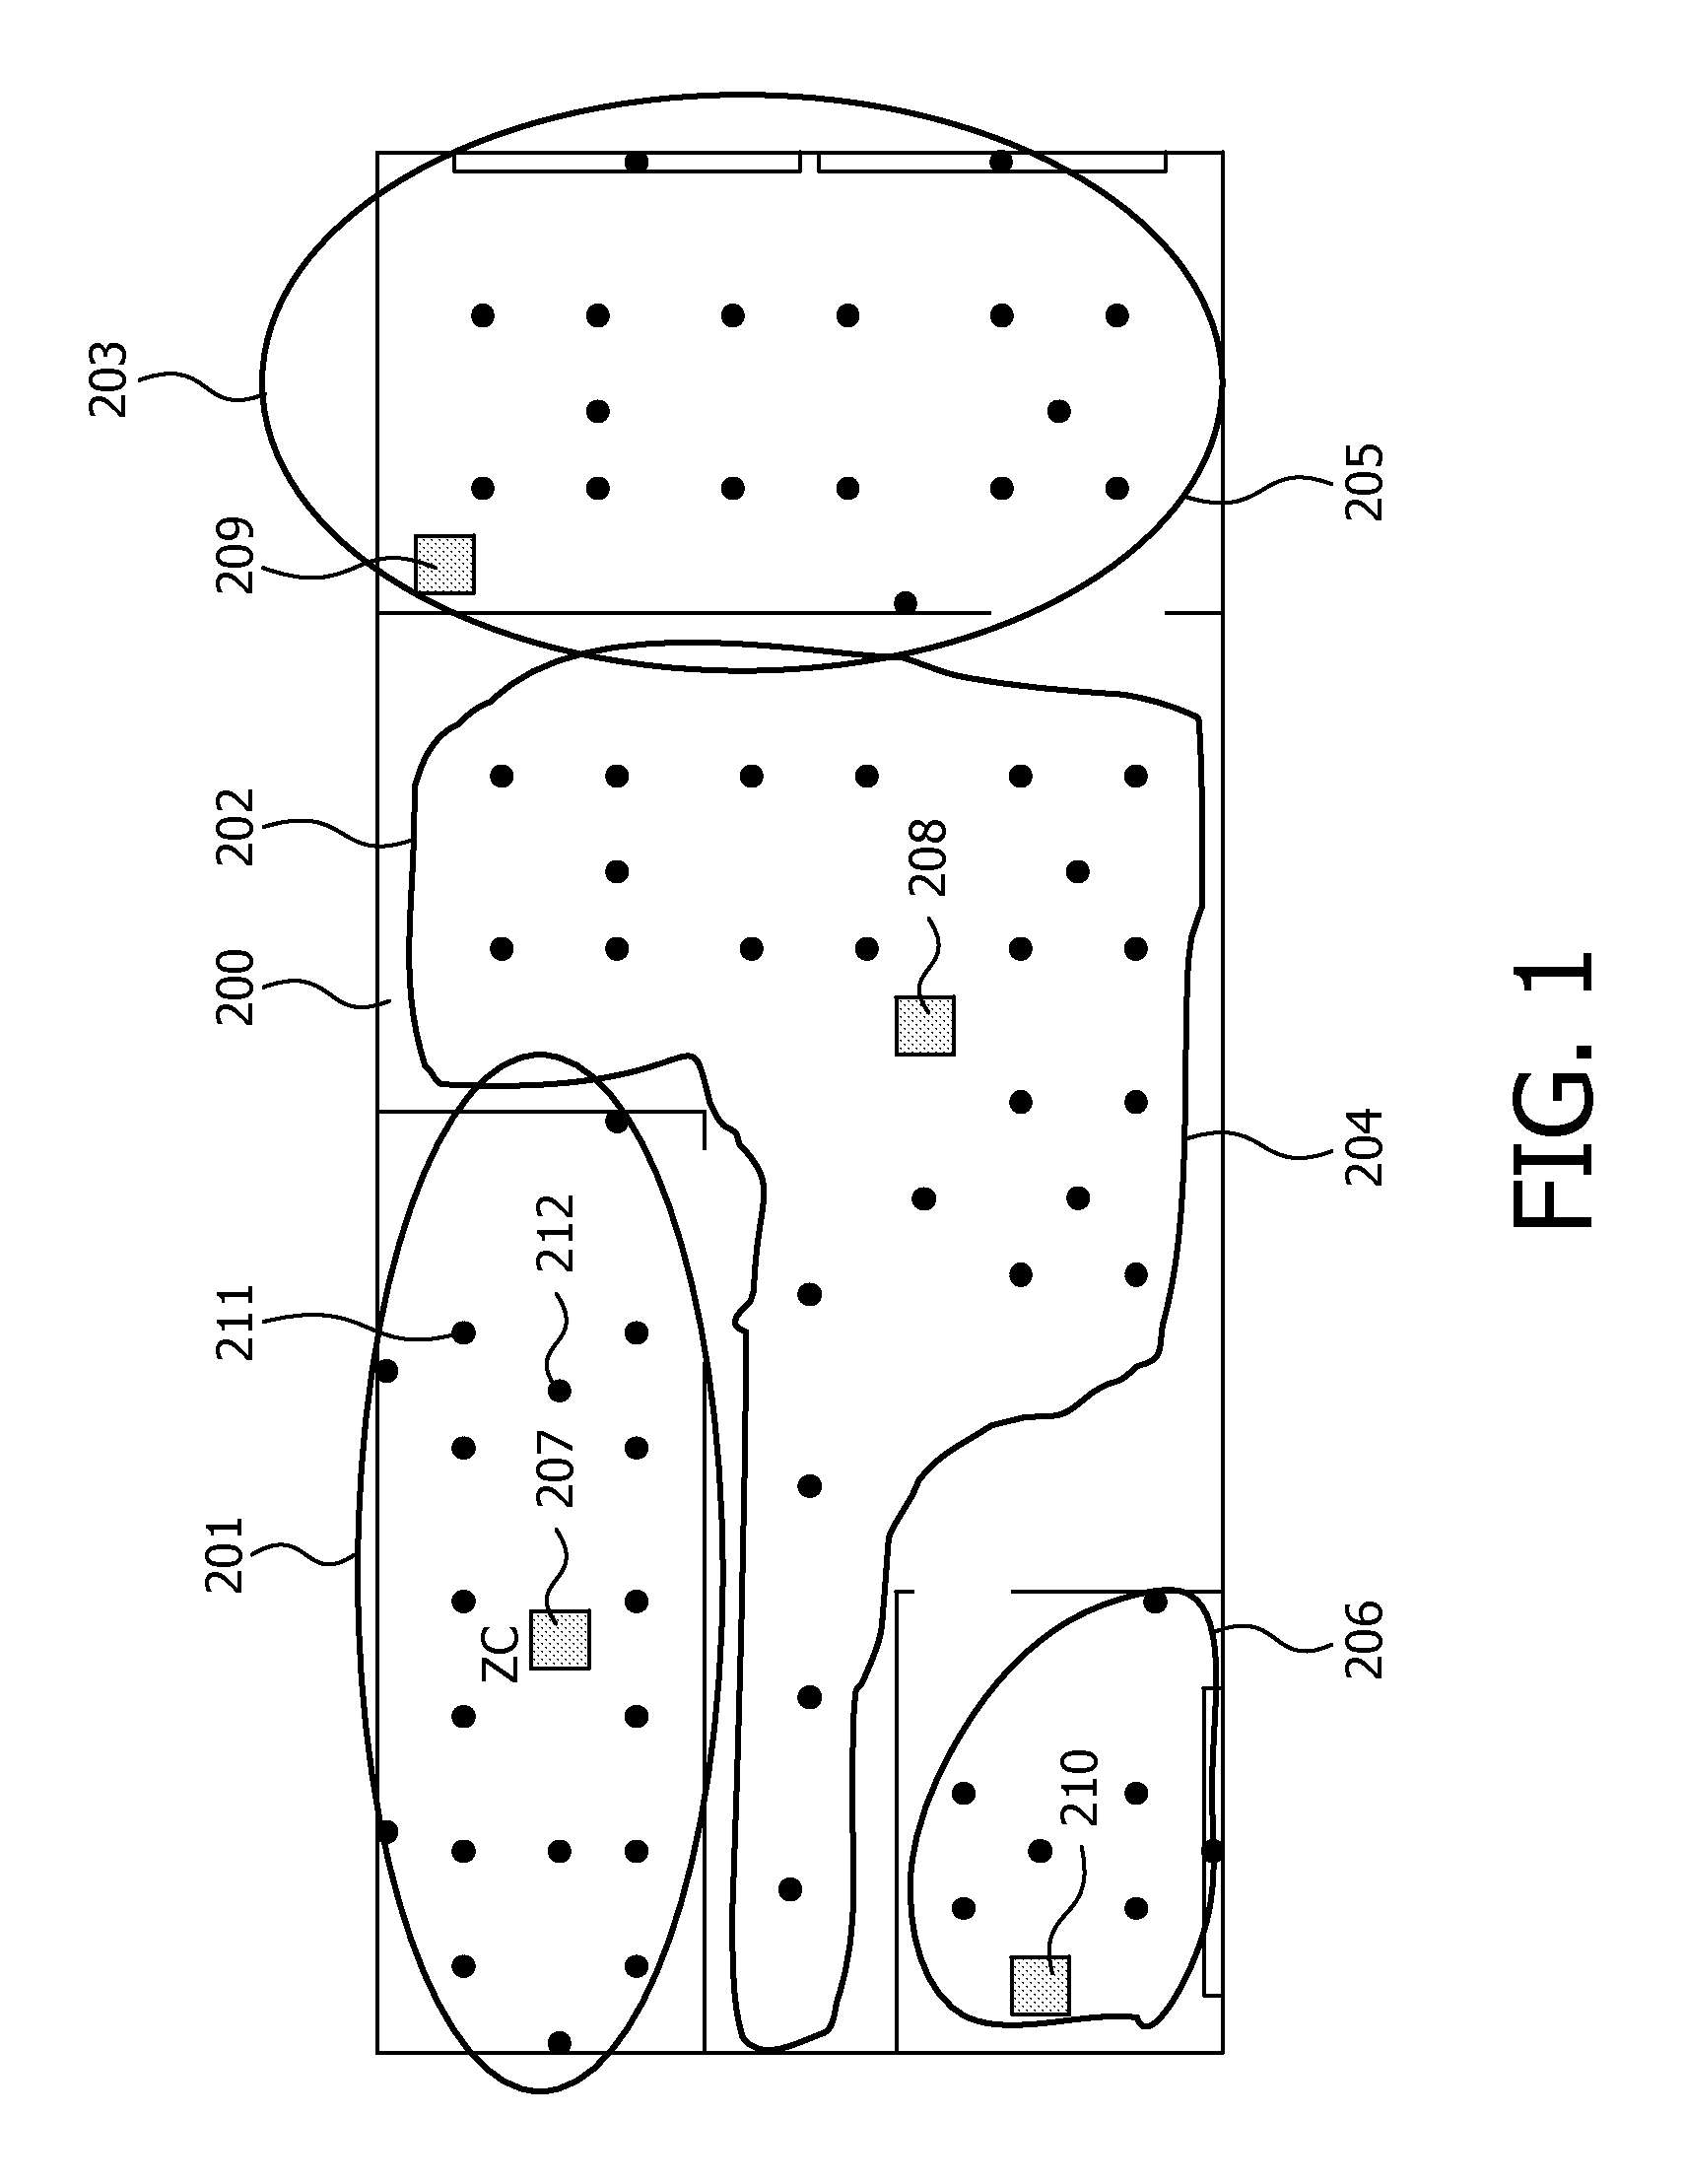 Method of associating or re-associating devices in a control network